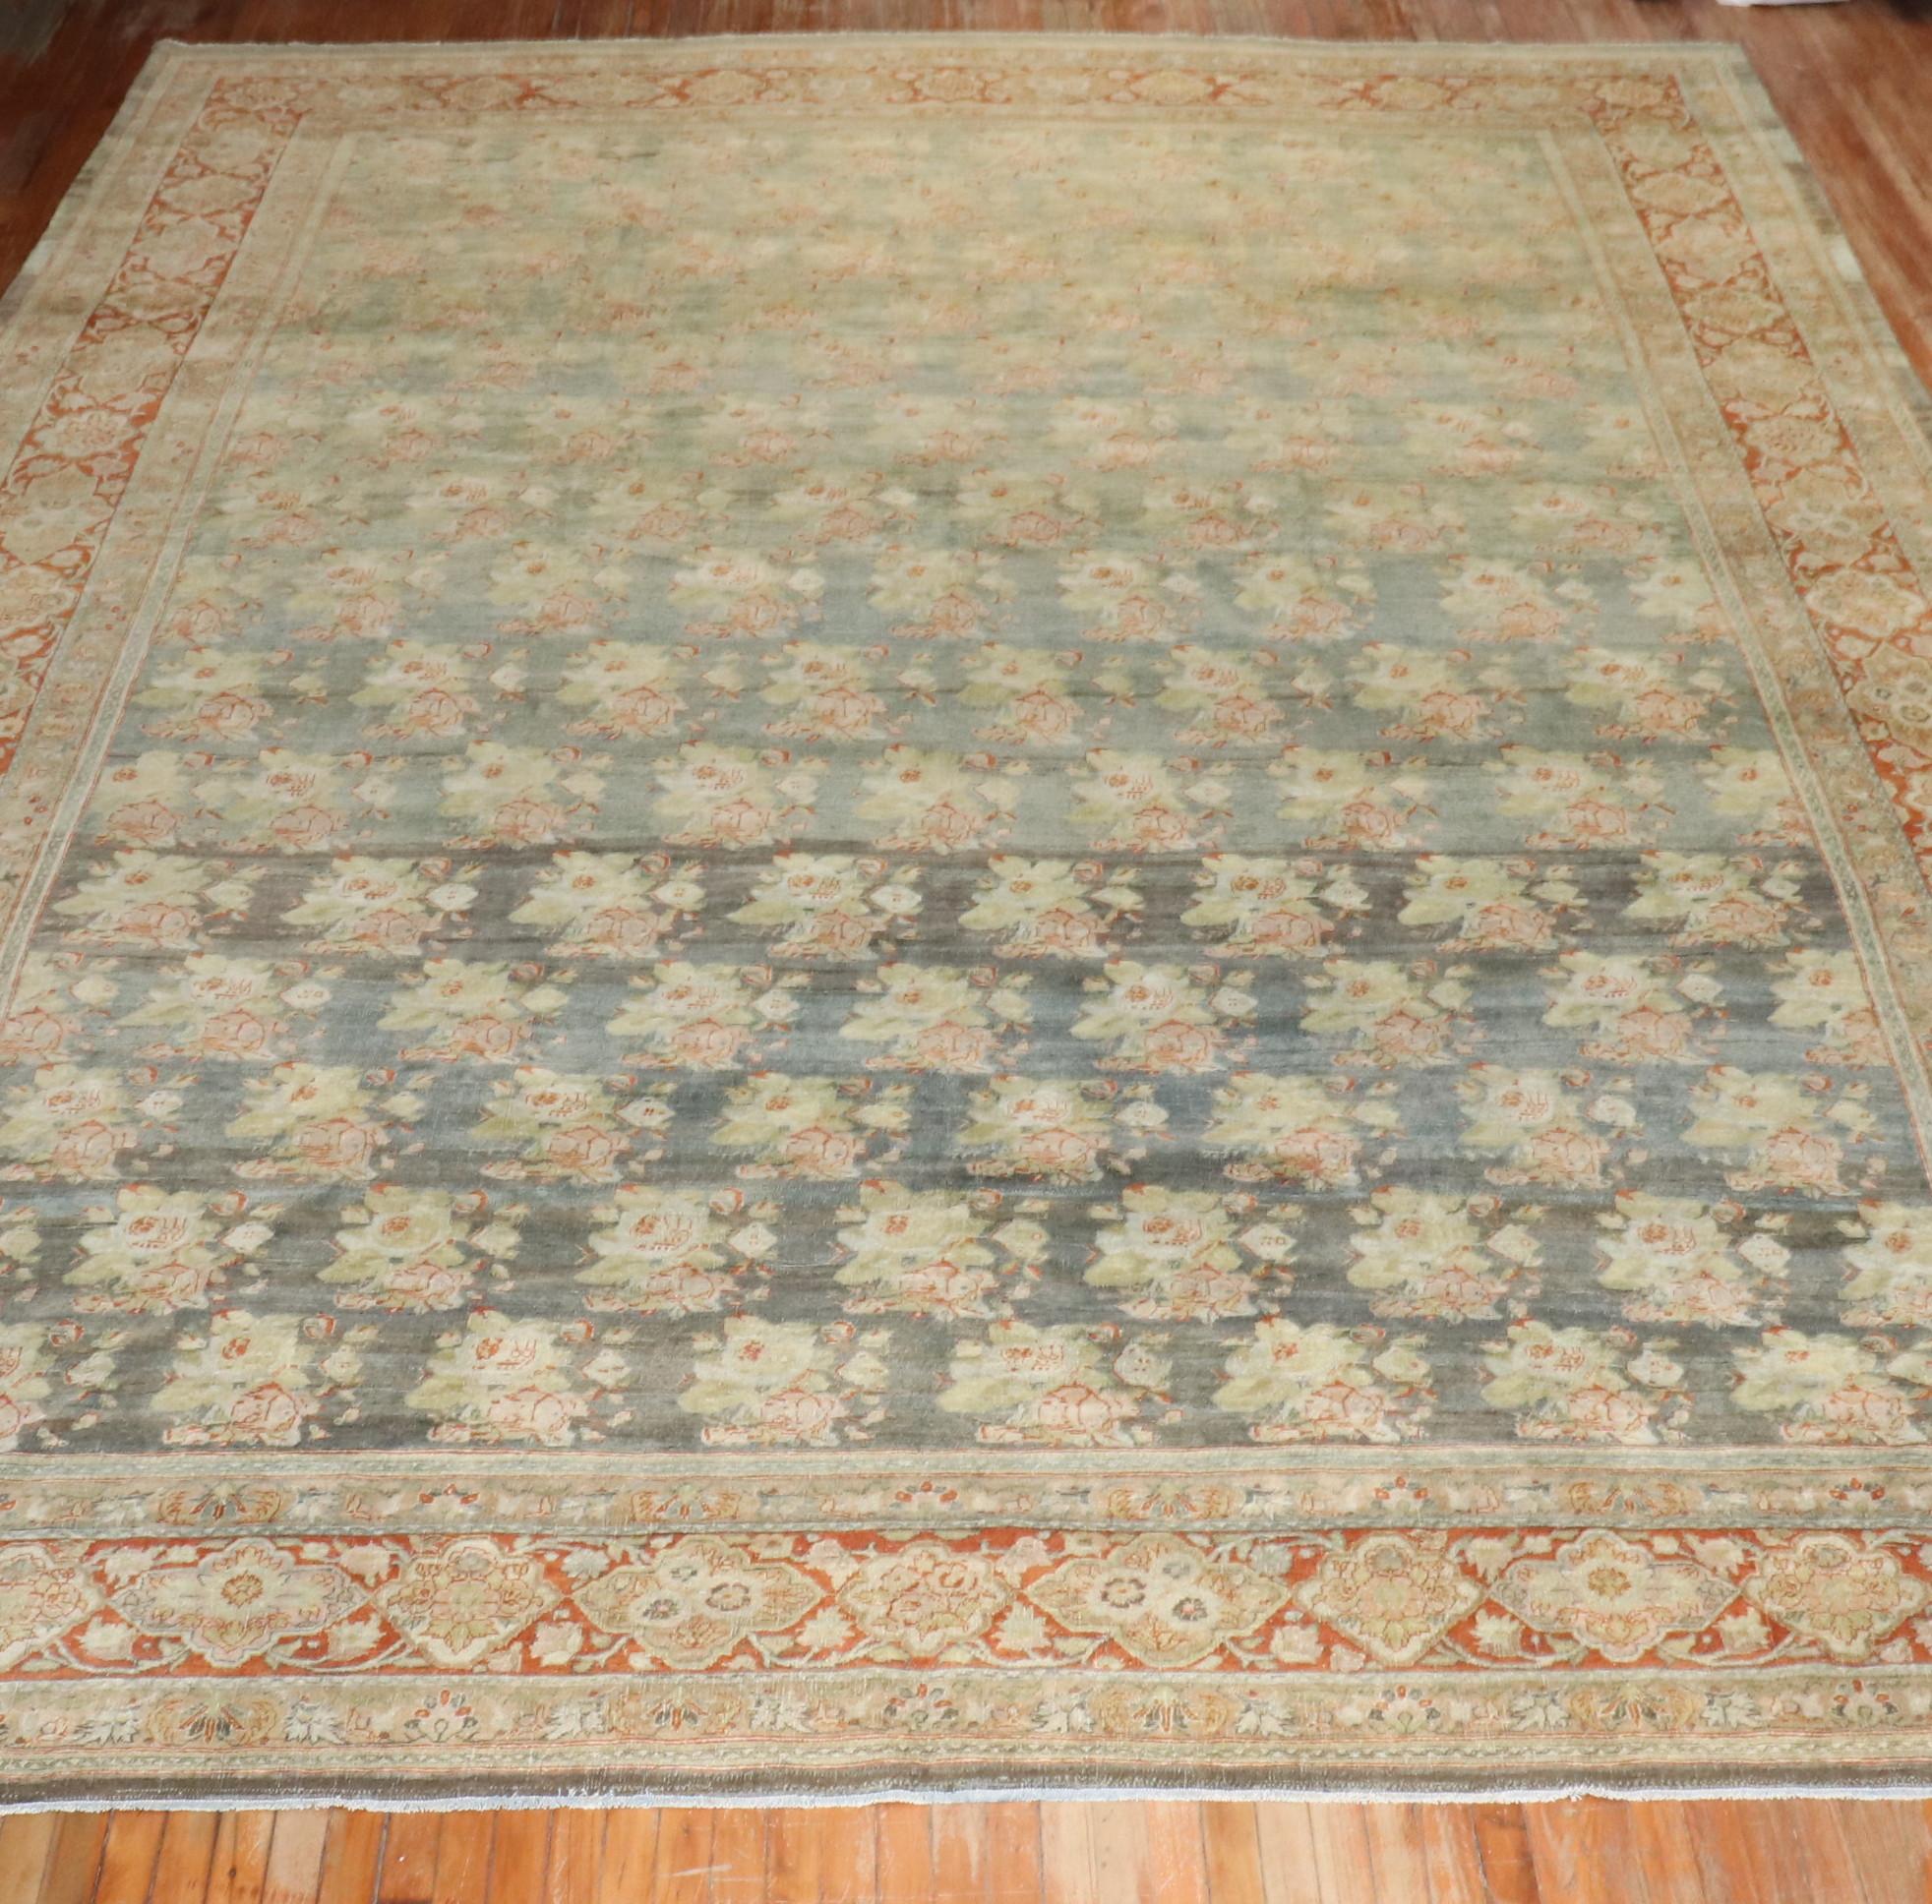 1910s Large Size high decorative Persian bidjar with an all over floral design on a striated abrashed ground. STUNNING to say the least

Size 12' 5